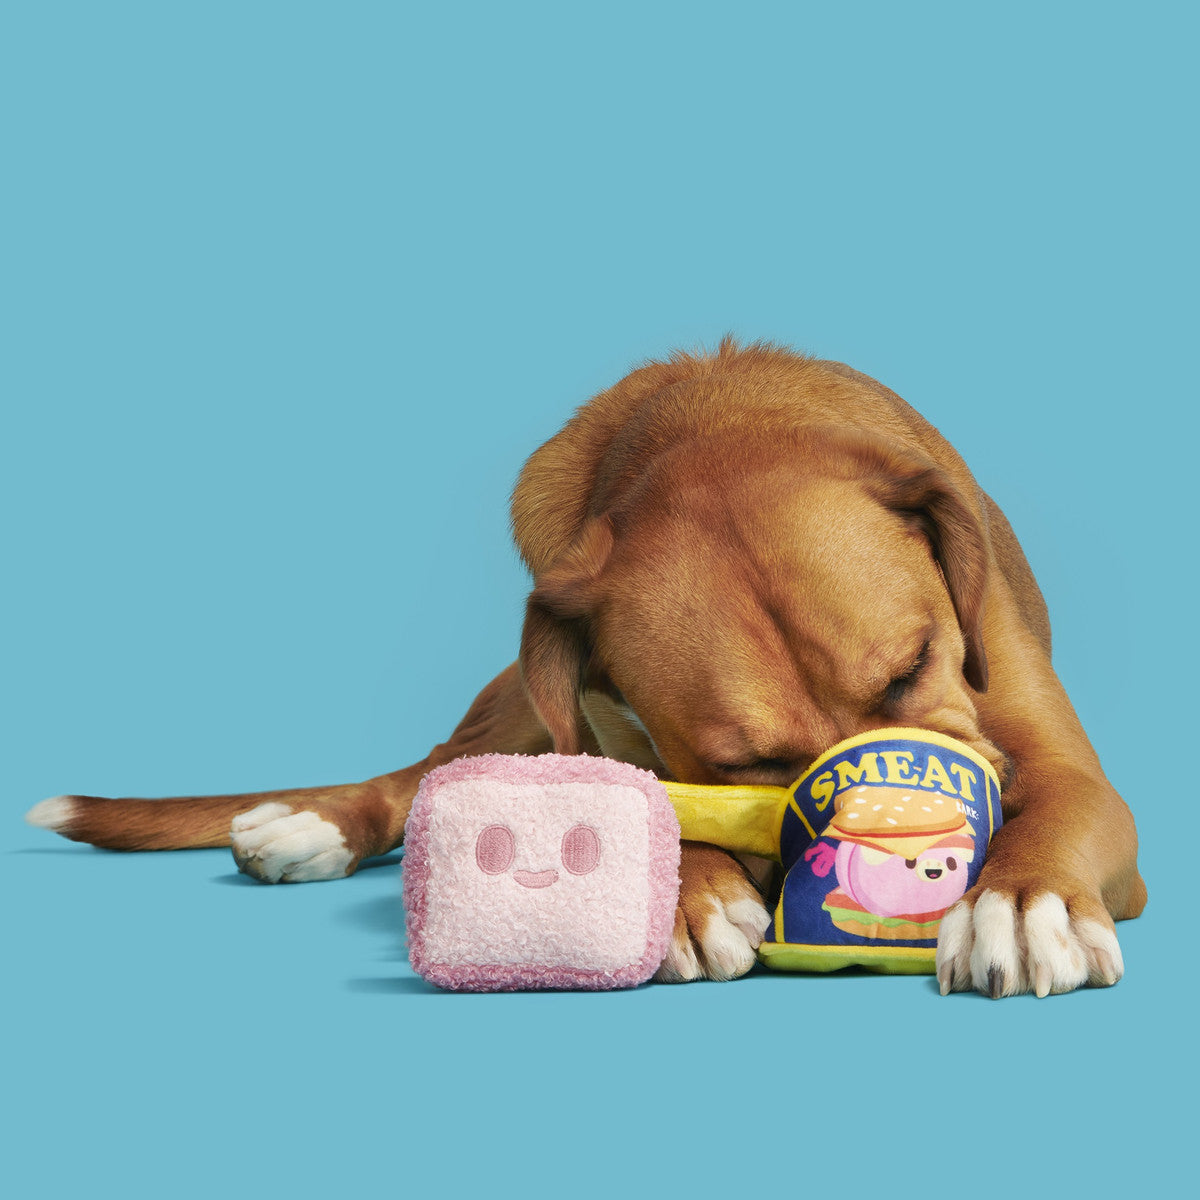 Canned SMEAT Dog Toy